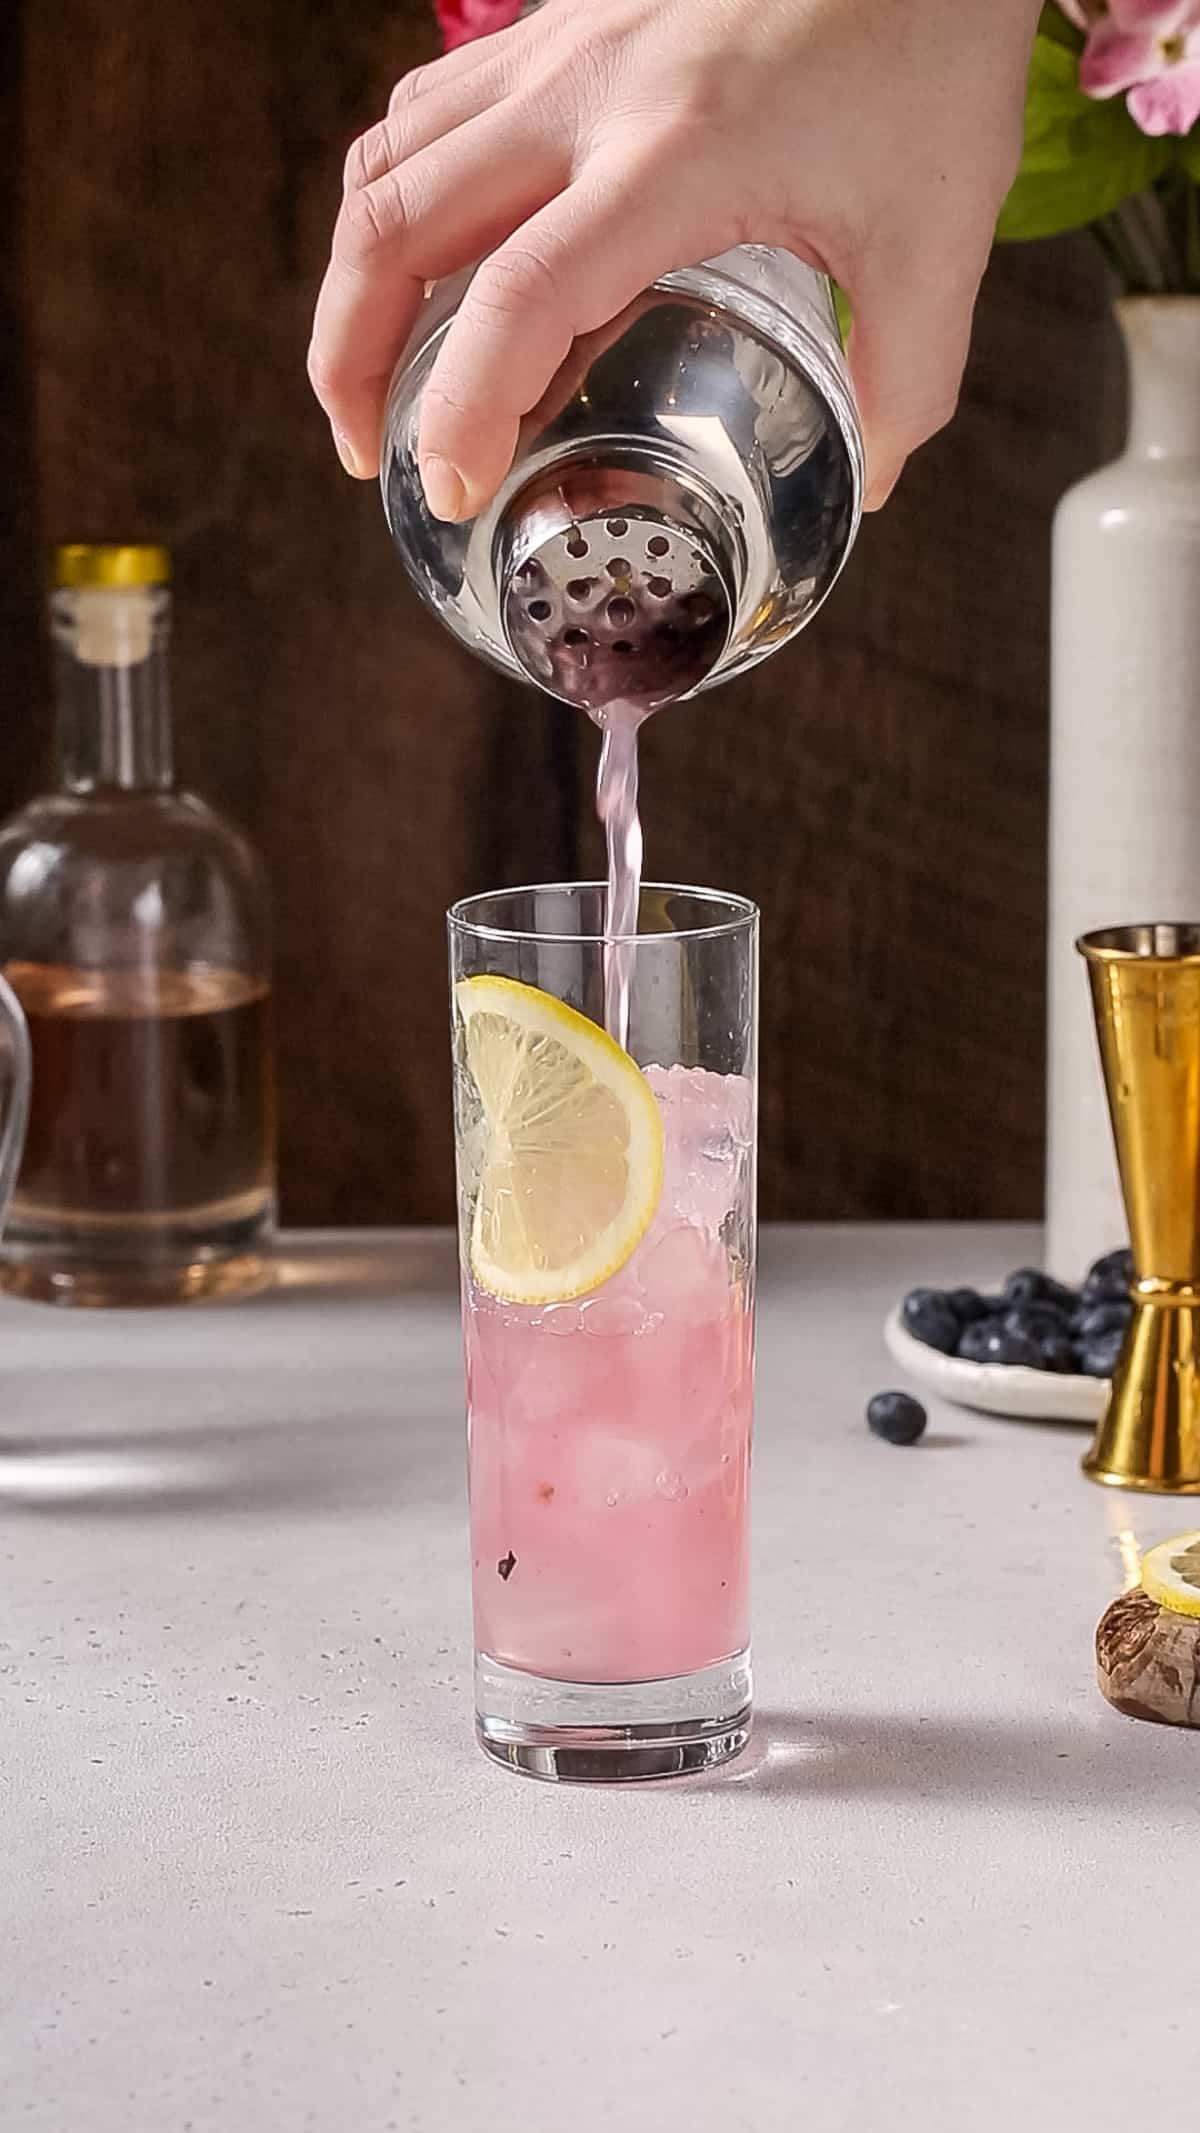 Hand straining a pink liquid from a cocktail shaker into a prepared collins glass.